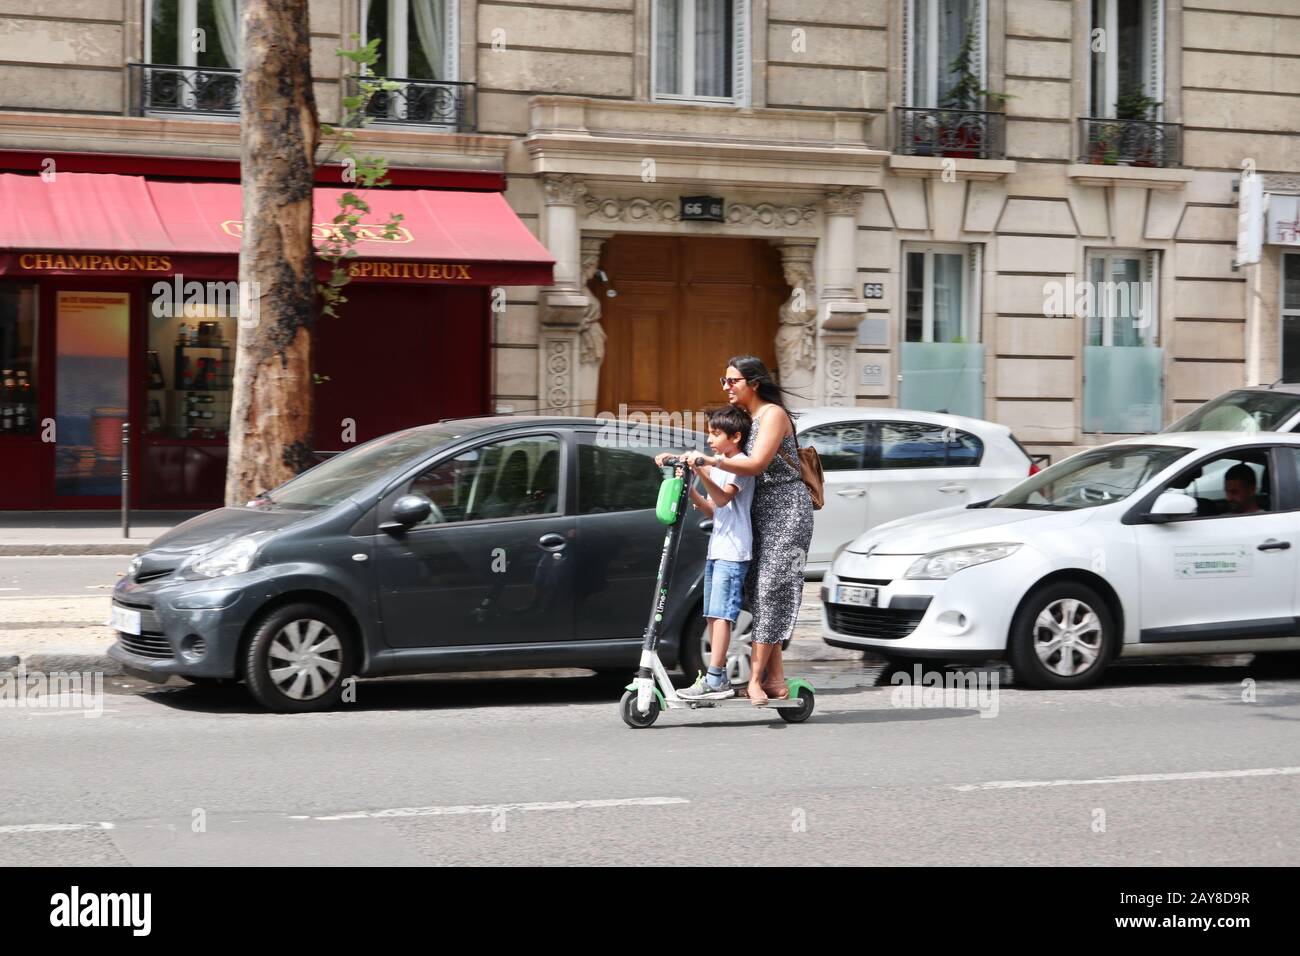 Woman and child Ride electric scooter in Paris, France Europe Stock Photo